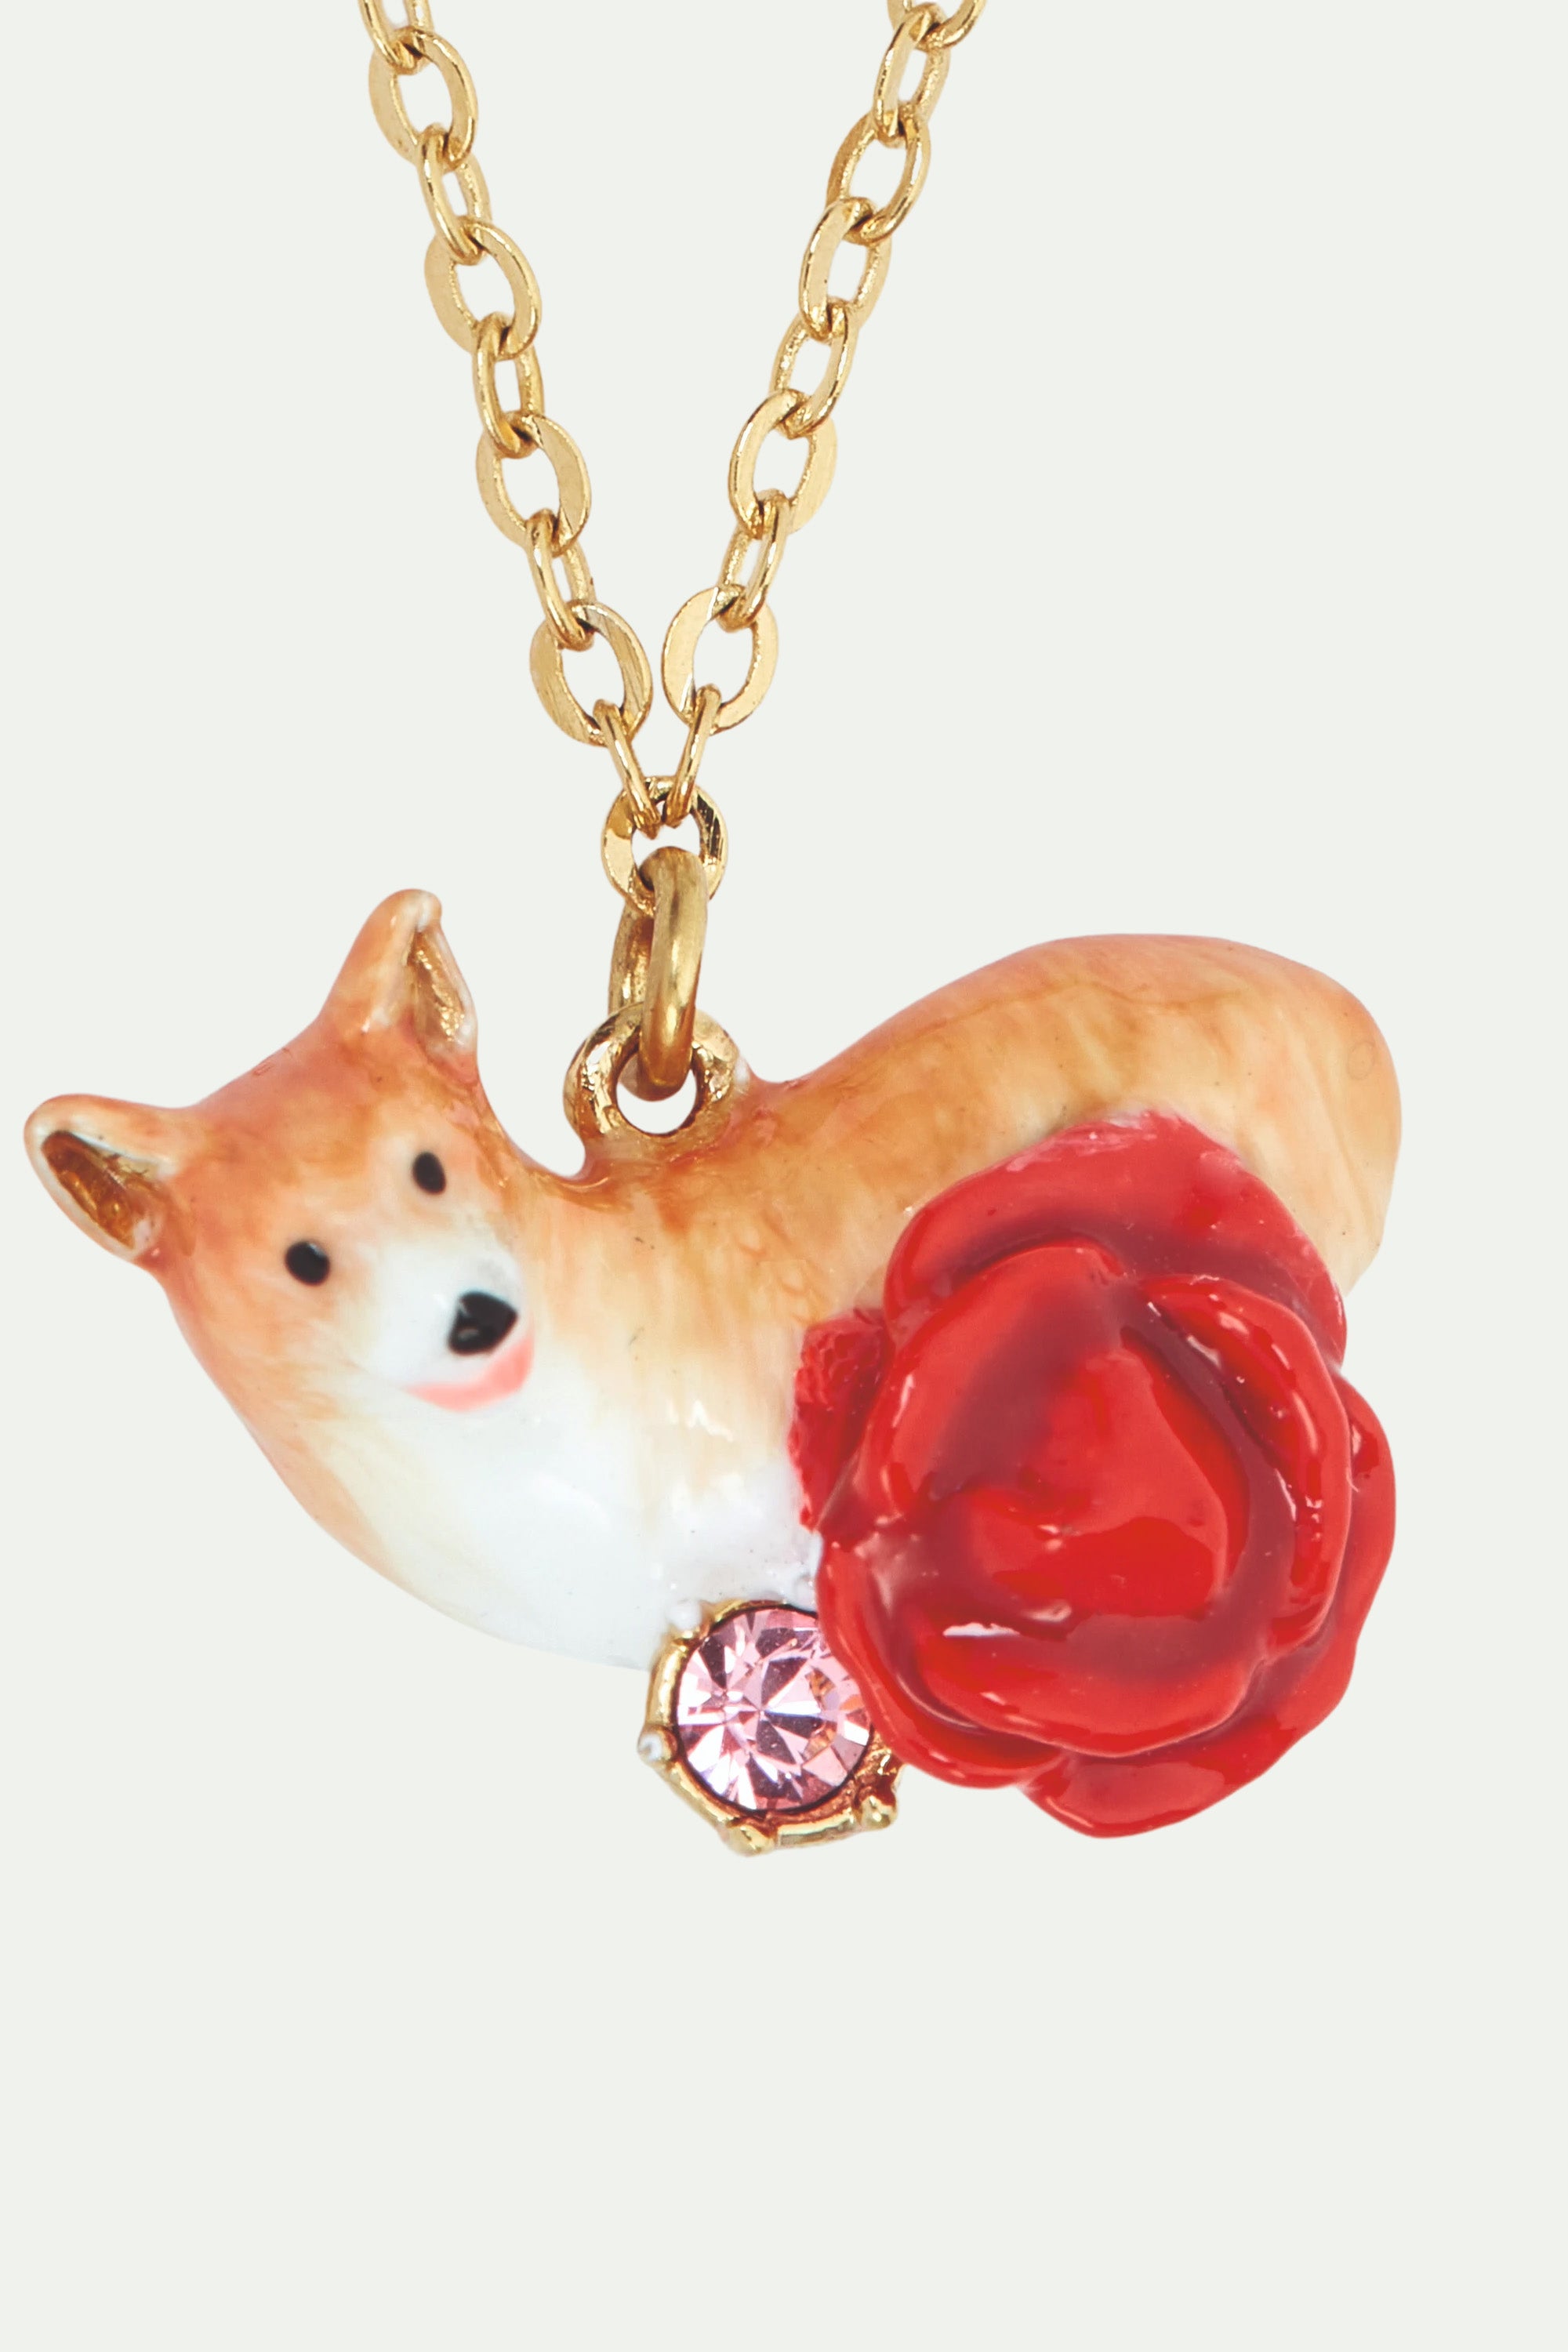 Corgi and red rose pendant necklace